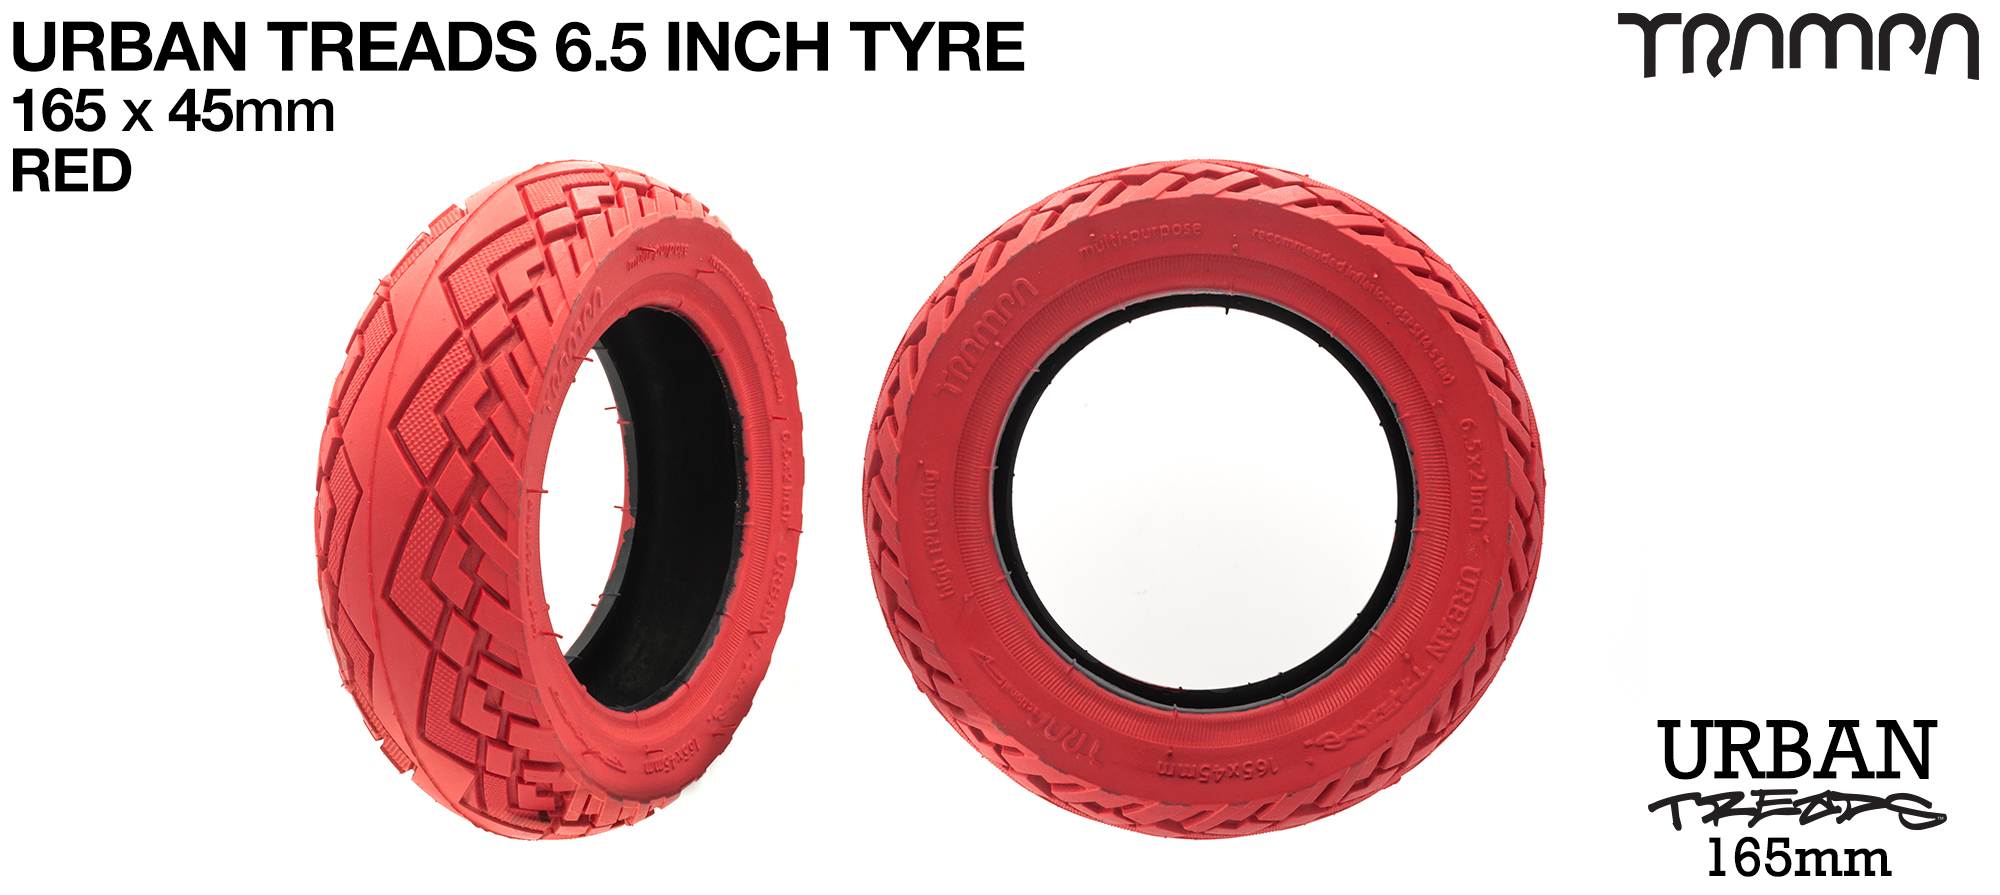 URBAN TREADS 6 Inch Tyre measures 3.75x 1.75x 6.5 Inch or 165x 45mm with 3.75 inch Rim & fits all 3.75 inch Hubs - RED  